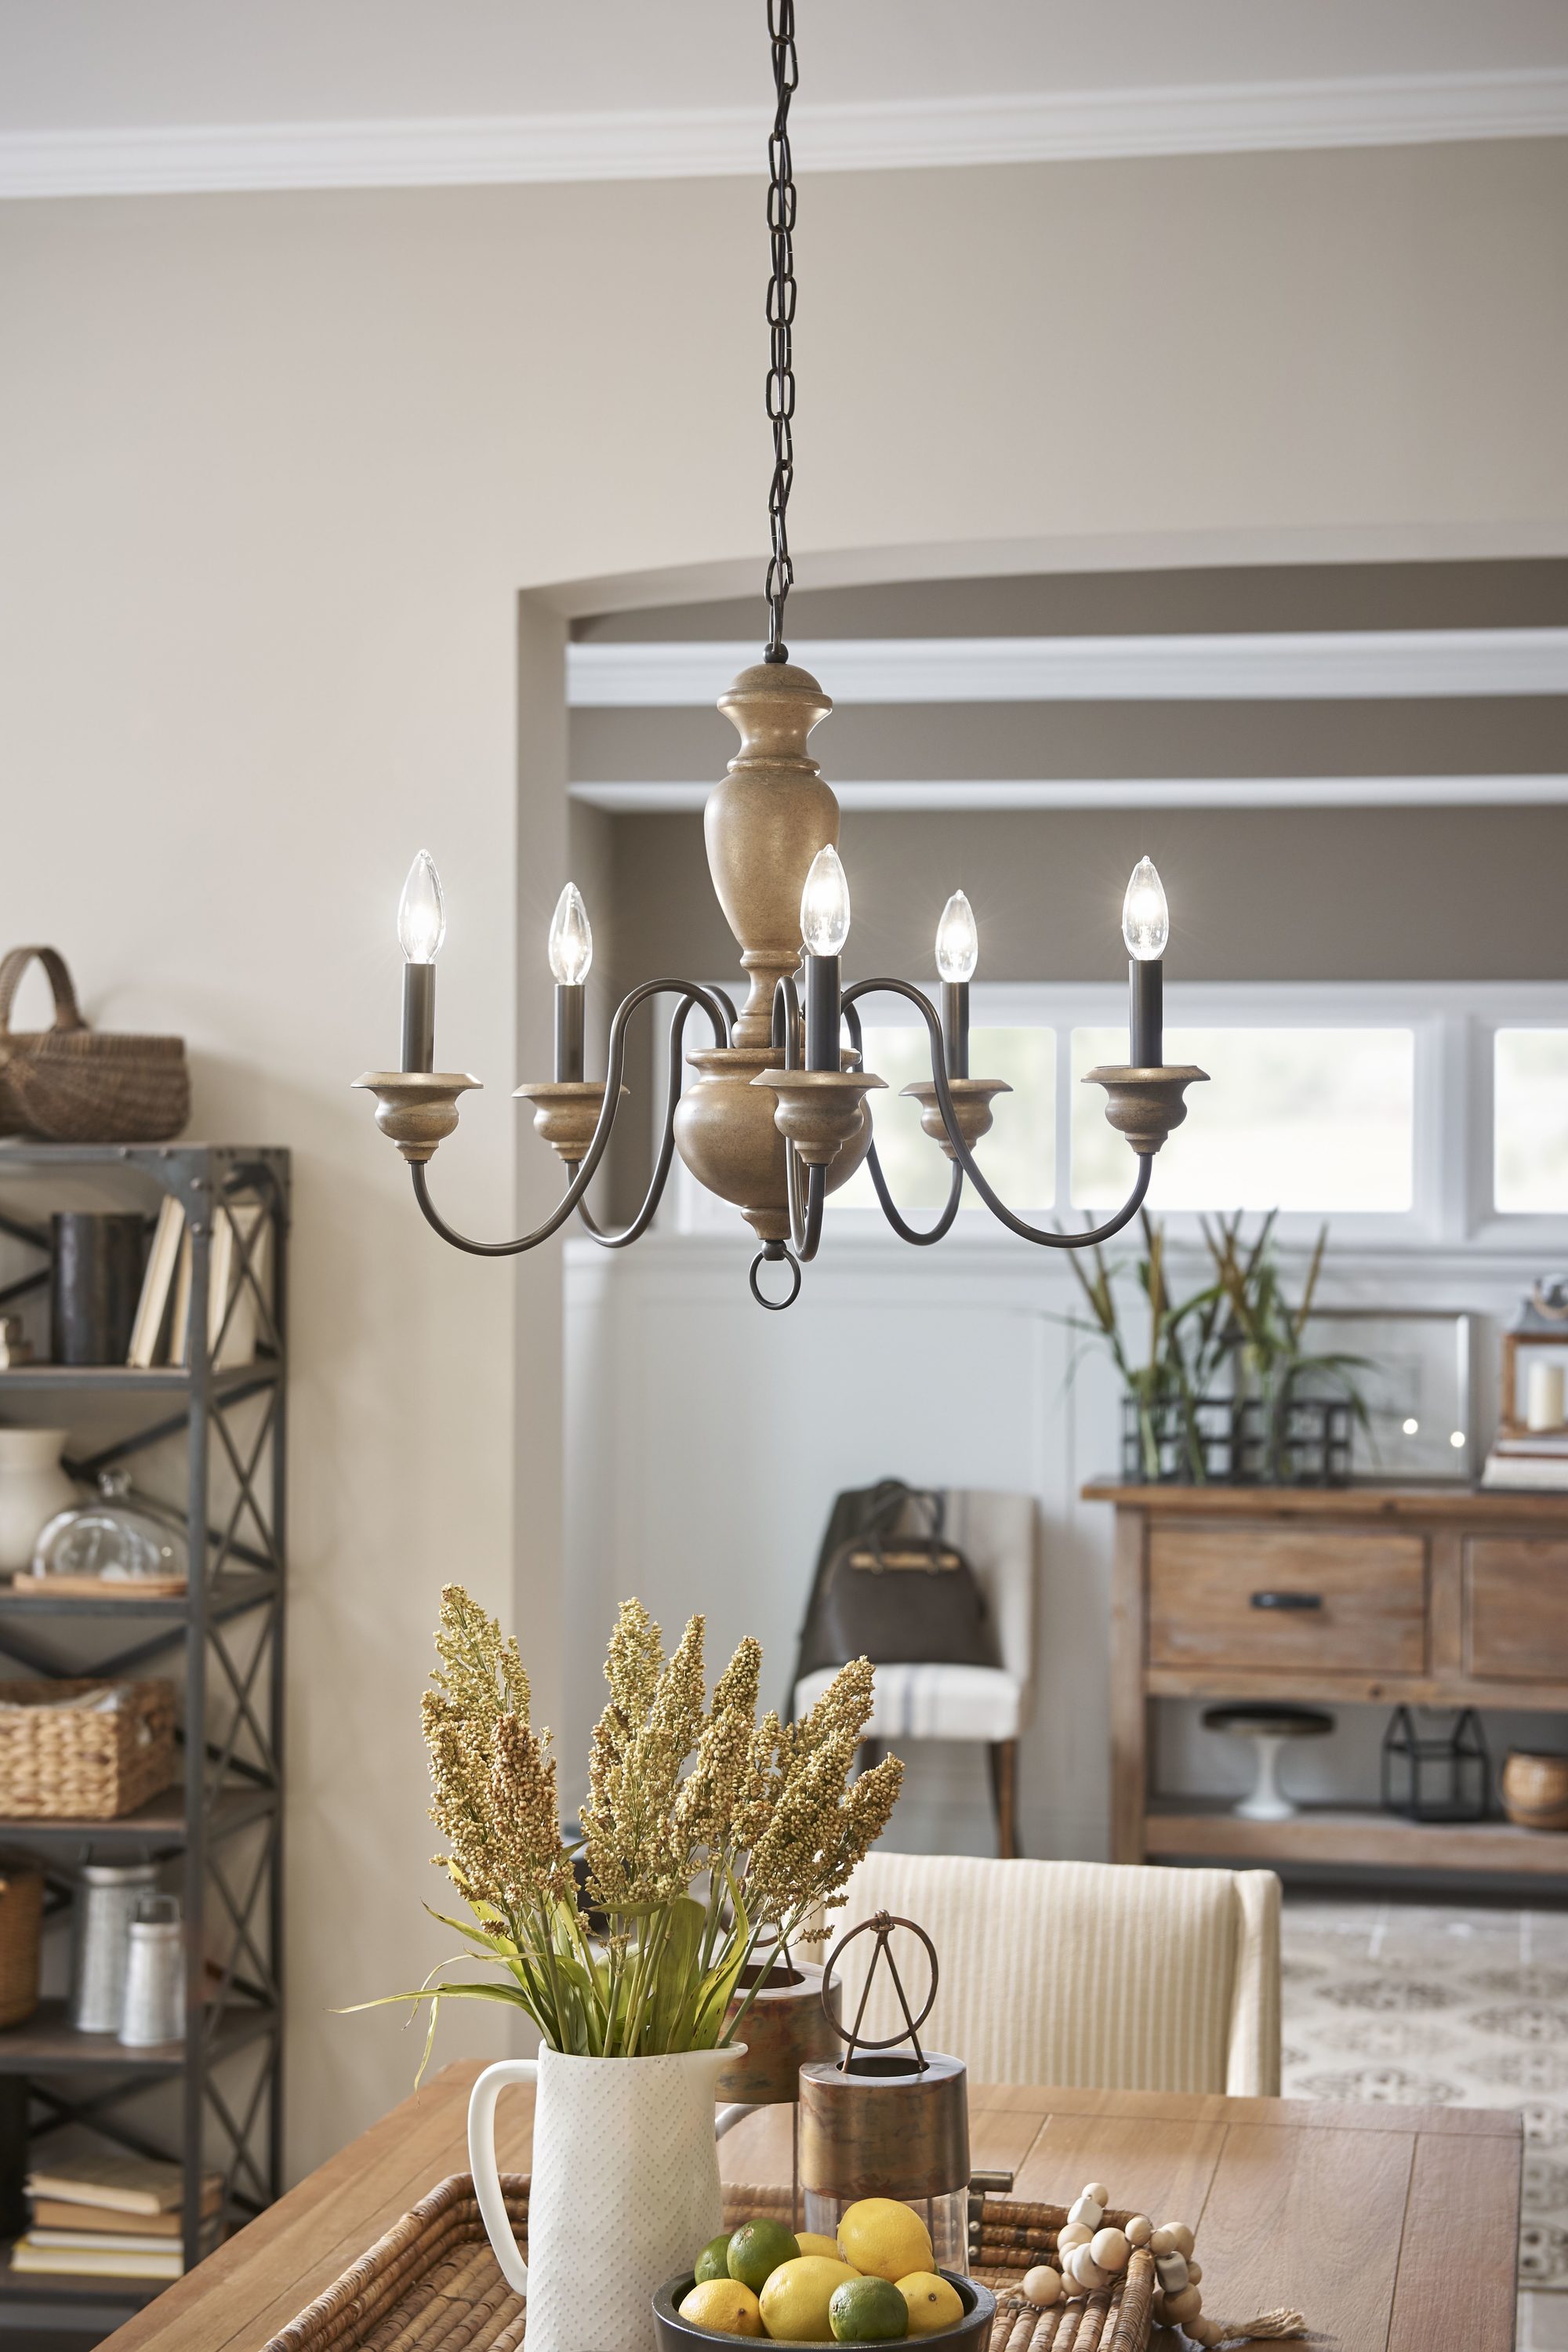 Kichler Beulah 5-Light Olde Bronze and Wood Tone French Country 